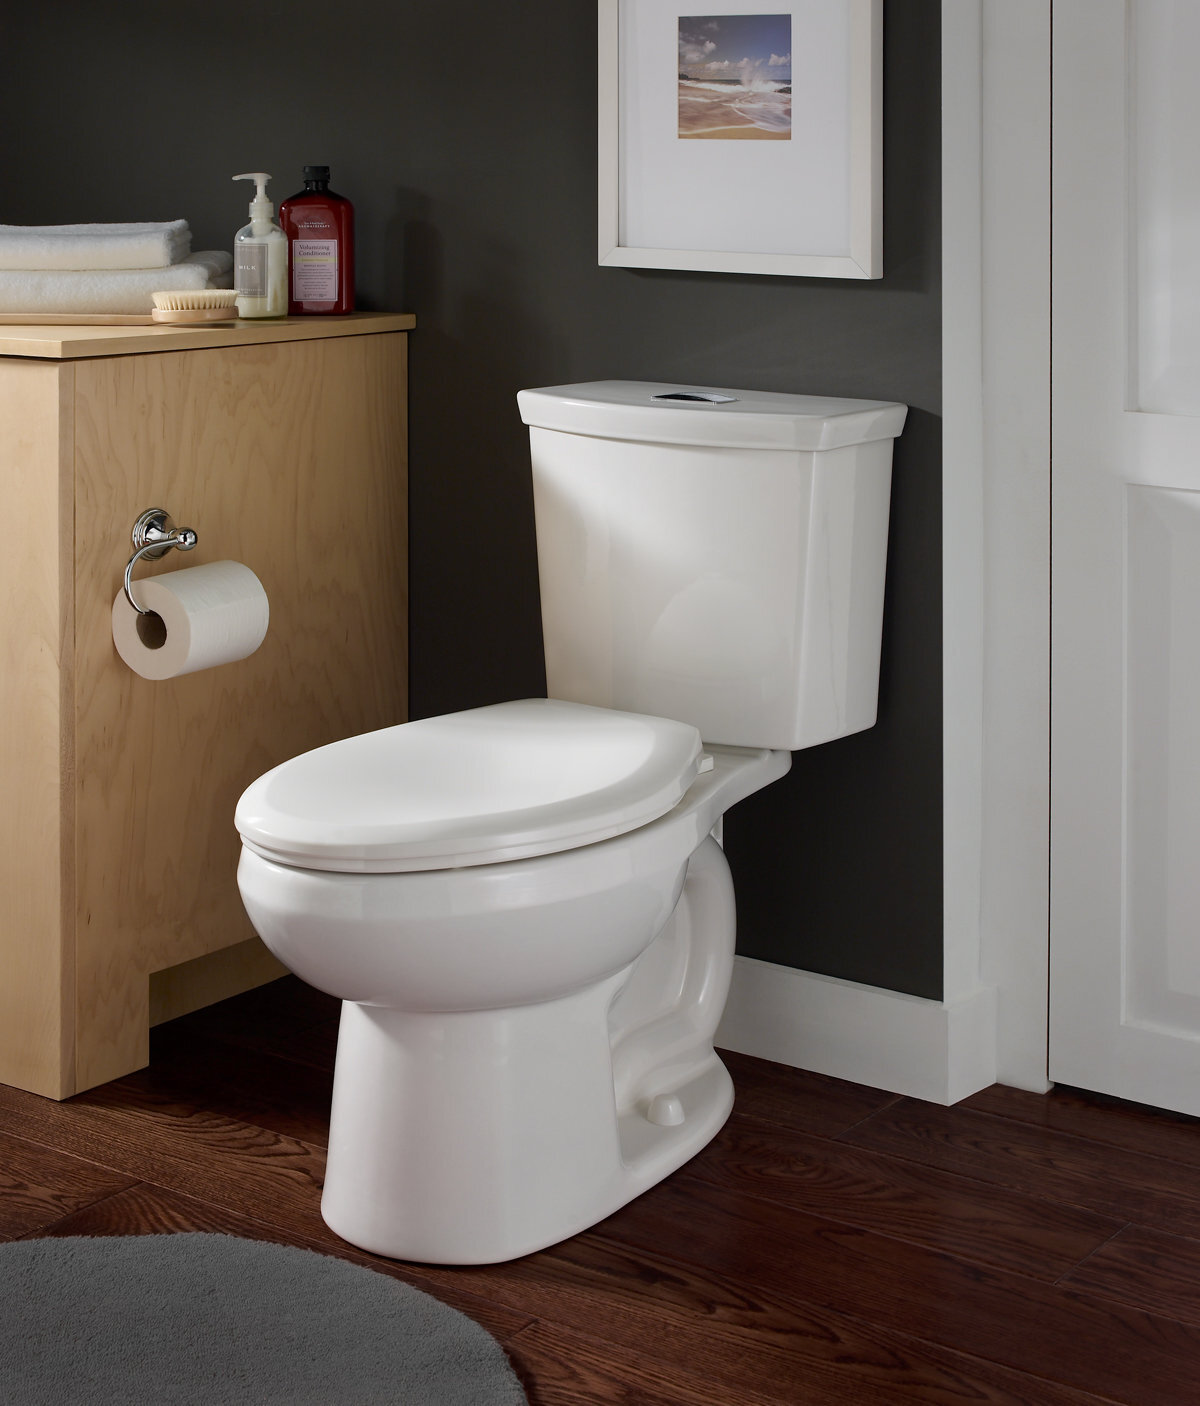 American-Standard-H2Option-Toilet-Review-TN